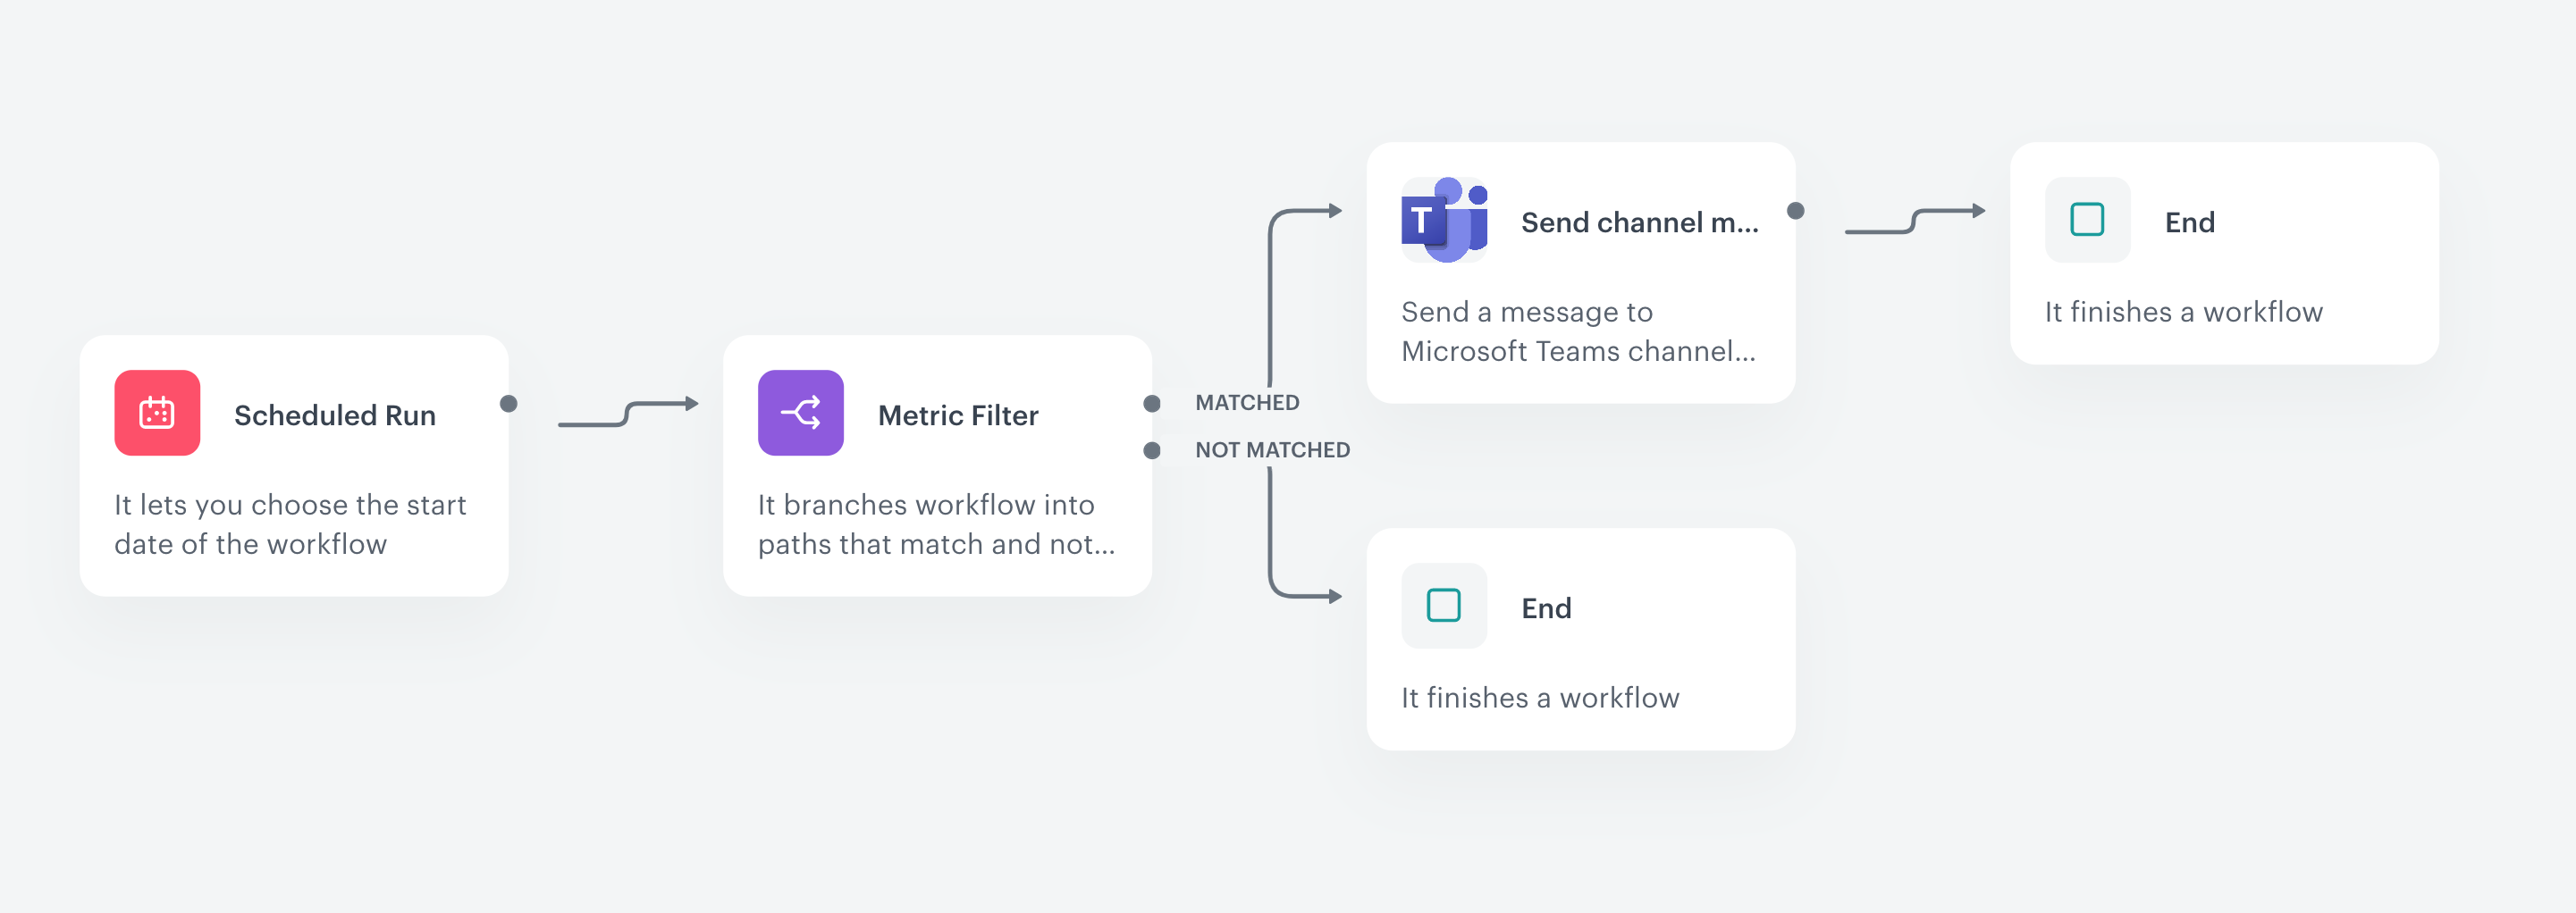 Configuration of the workflow that sends alert messages based on the metric results to the Microsoft Teams channel